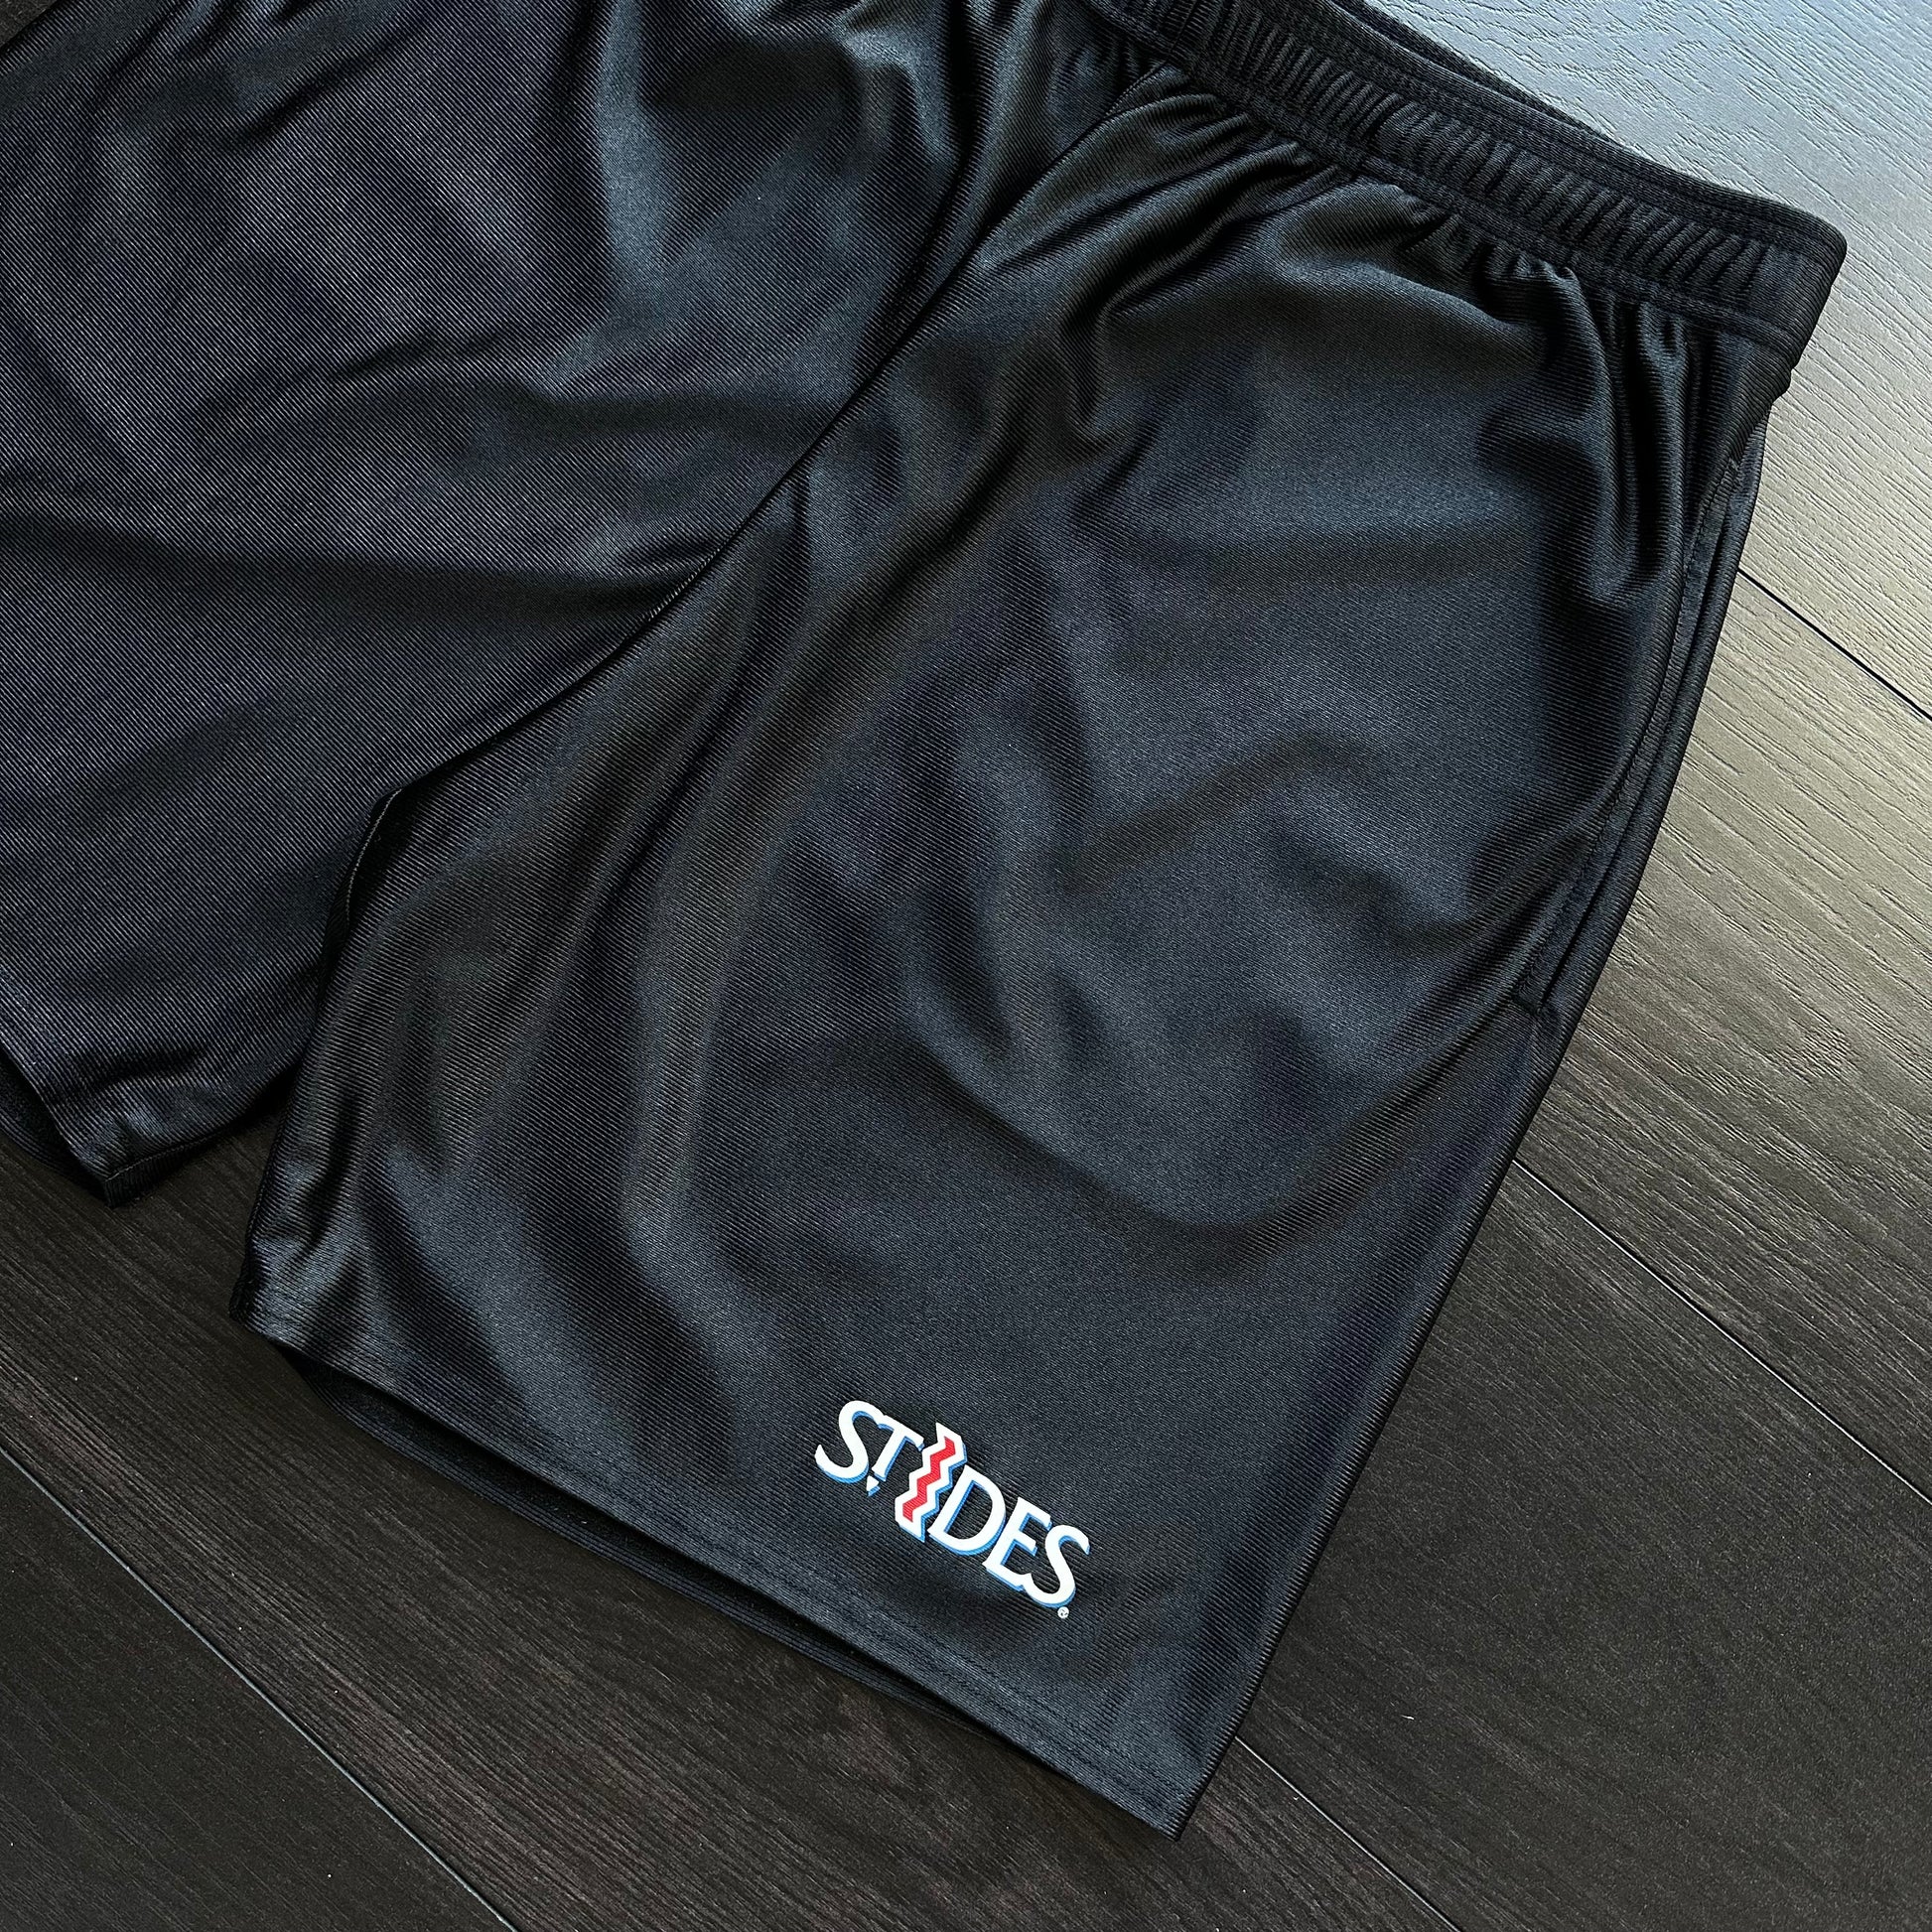 Supreme/St Ides Basketball Shorts – Not Your Father's Gear